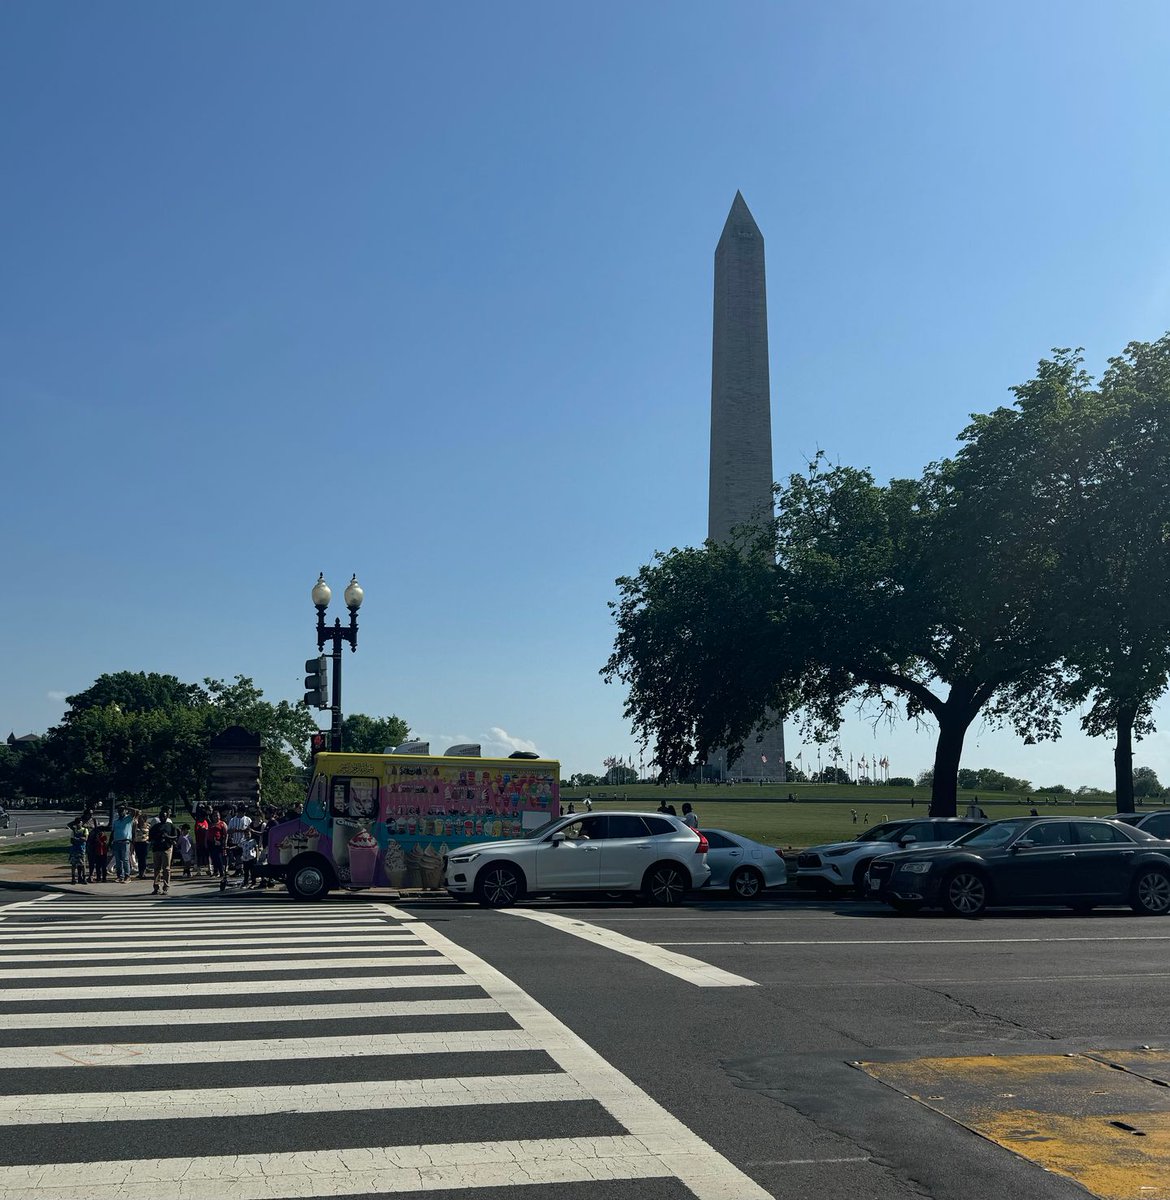 An early morning for some but day one of our travels and #cepa education are in the books! What an opportunity for #mendallfingrp 🙏🏼🙌🏼 #washingtonDC #Elevate2024 #exitplanning #successionplanning #mainebiz #travel #sightseeing #monuments #Florida